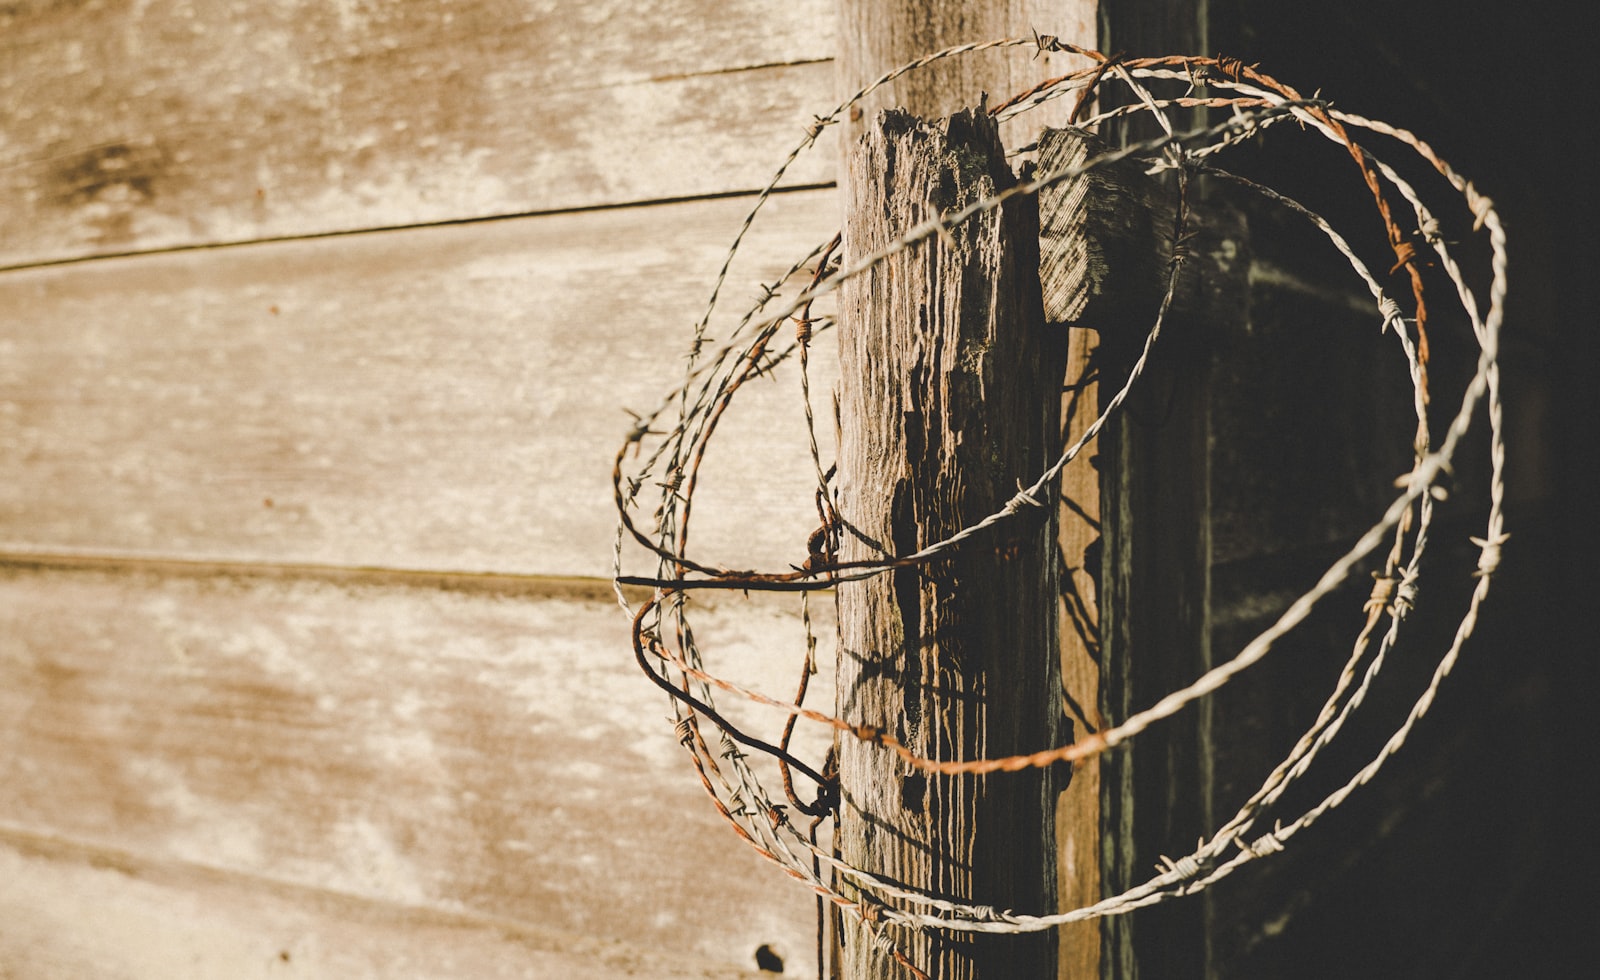 ZEISS Loxia 35mm F2 sample photo. Barbed wire on pole photography